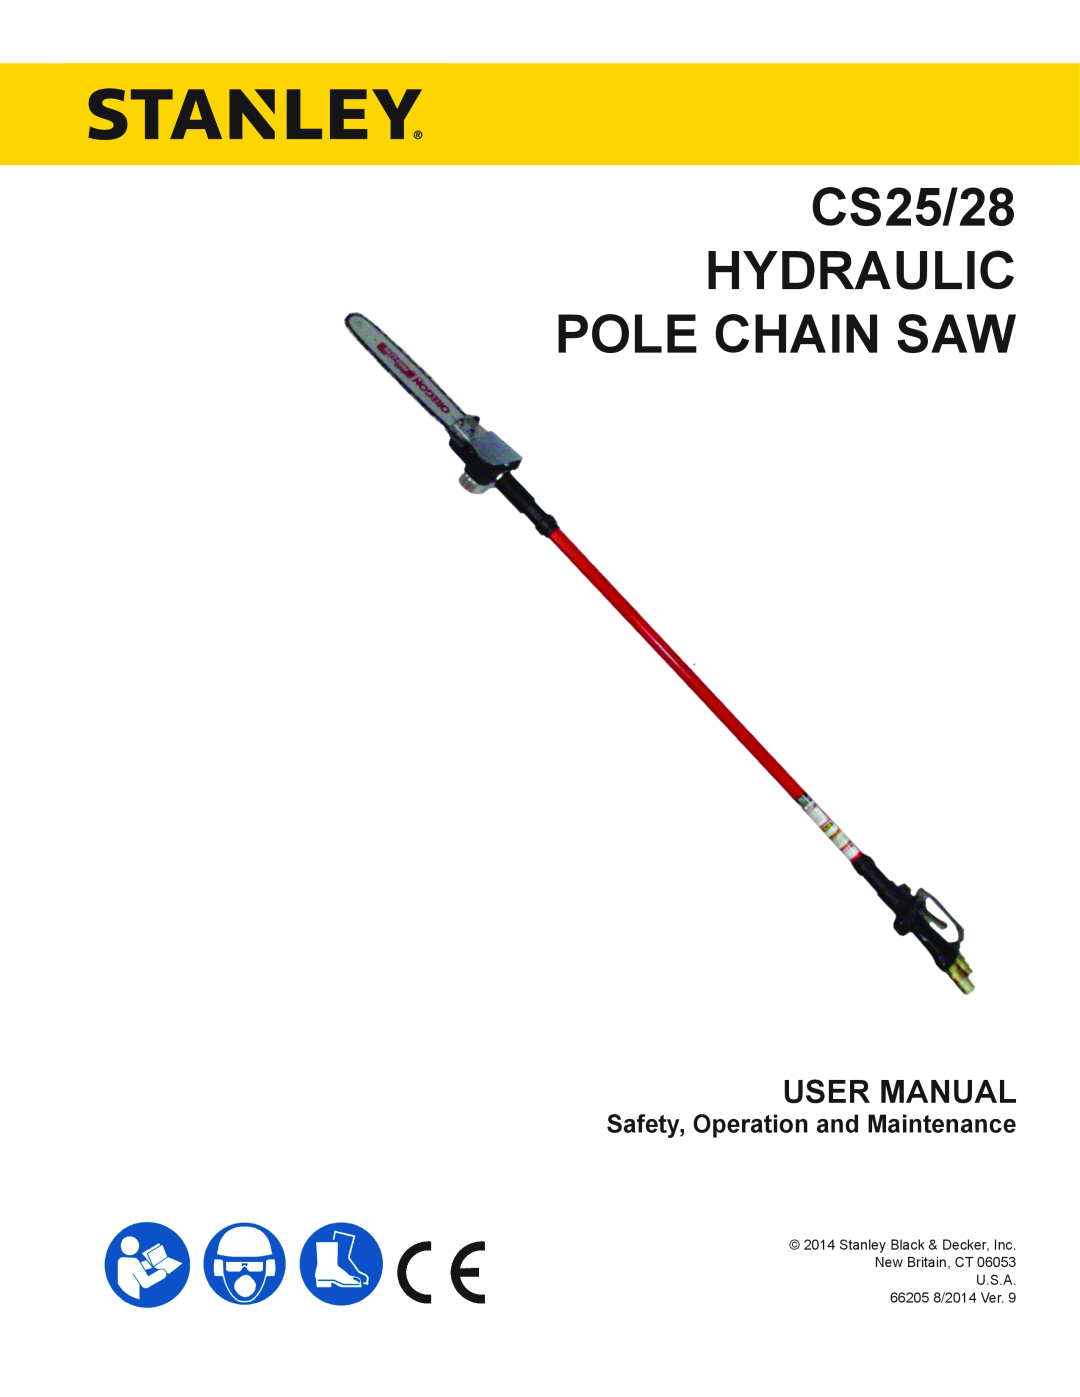 Stanley Black & Decker manual Safety, Operation and Maintenance, CS25/28 HYDRAULIC POLE CHAIN SAW 